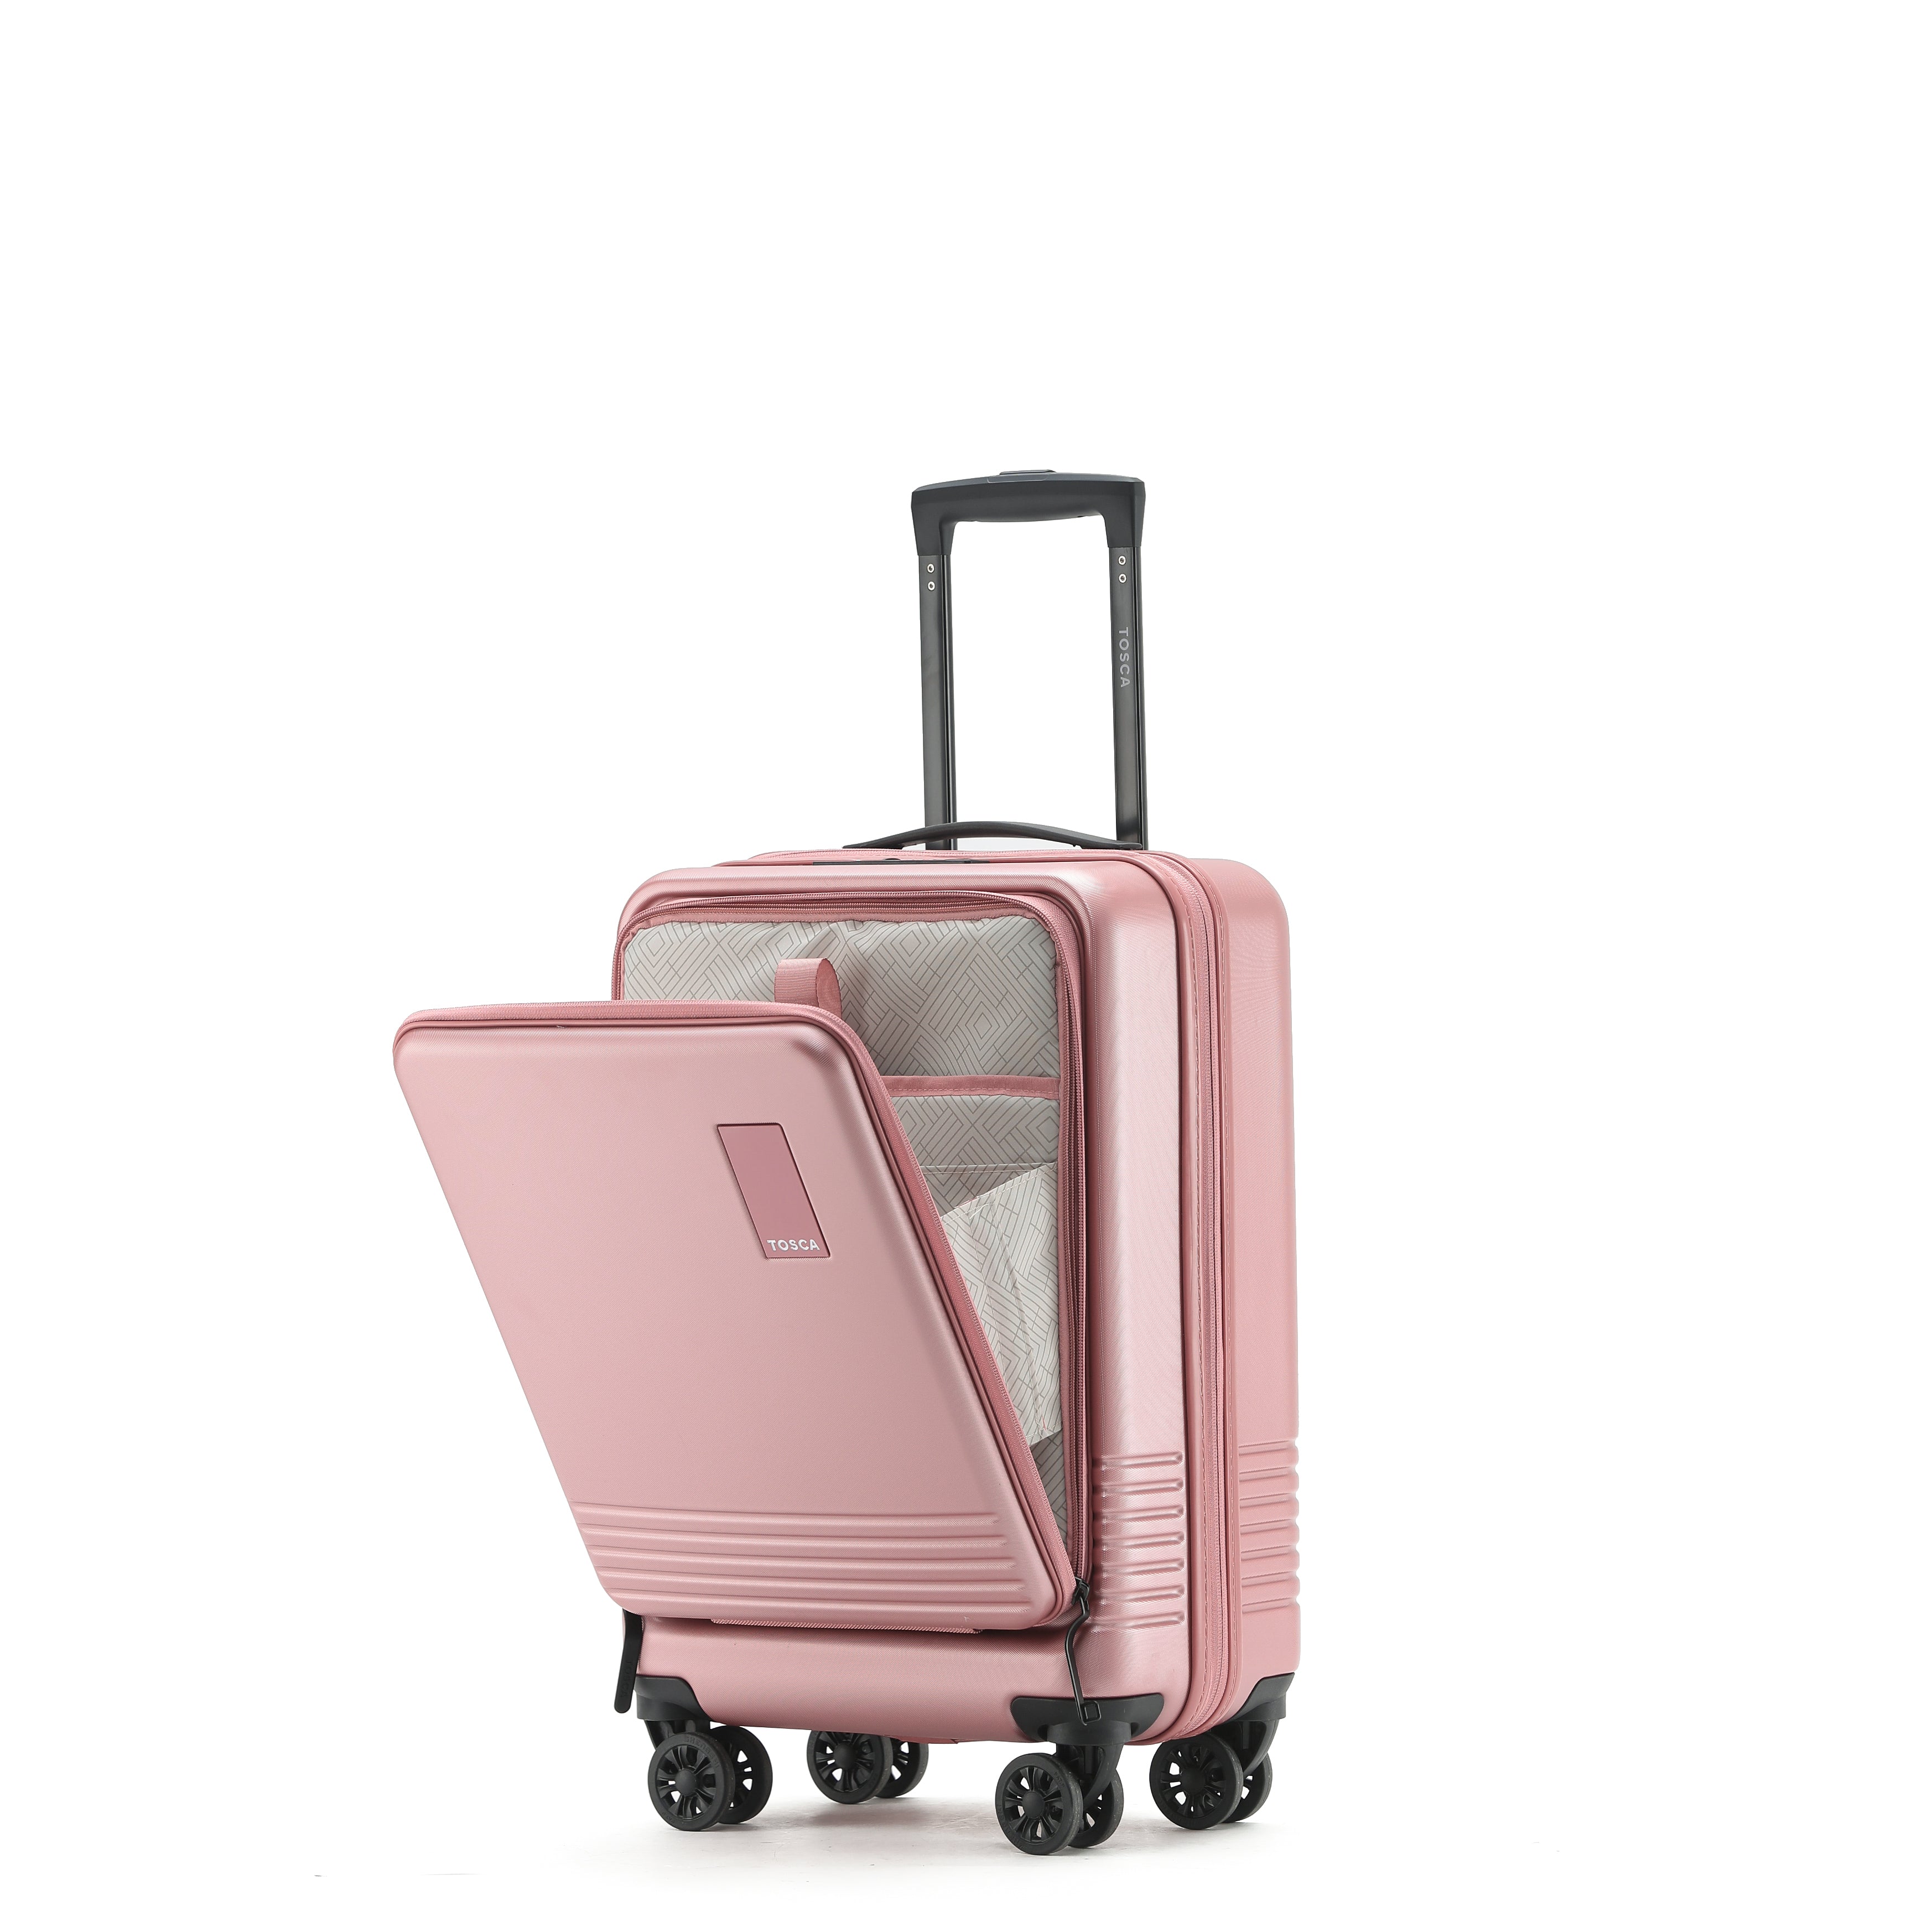 Tosca - TCA644 Horizon Front lid opening Set of 3 suitcases - Dusty Rose-12